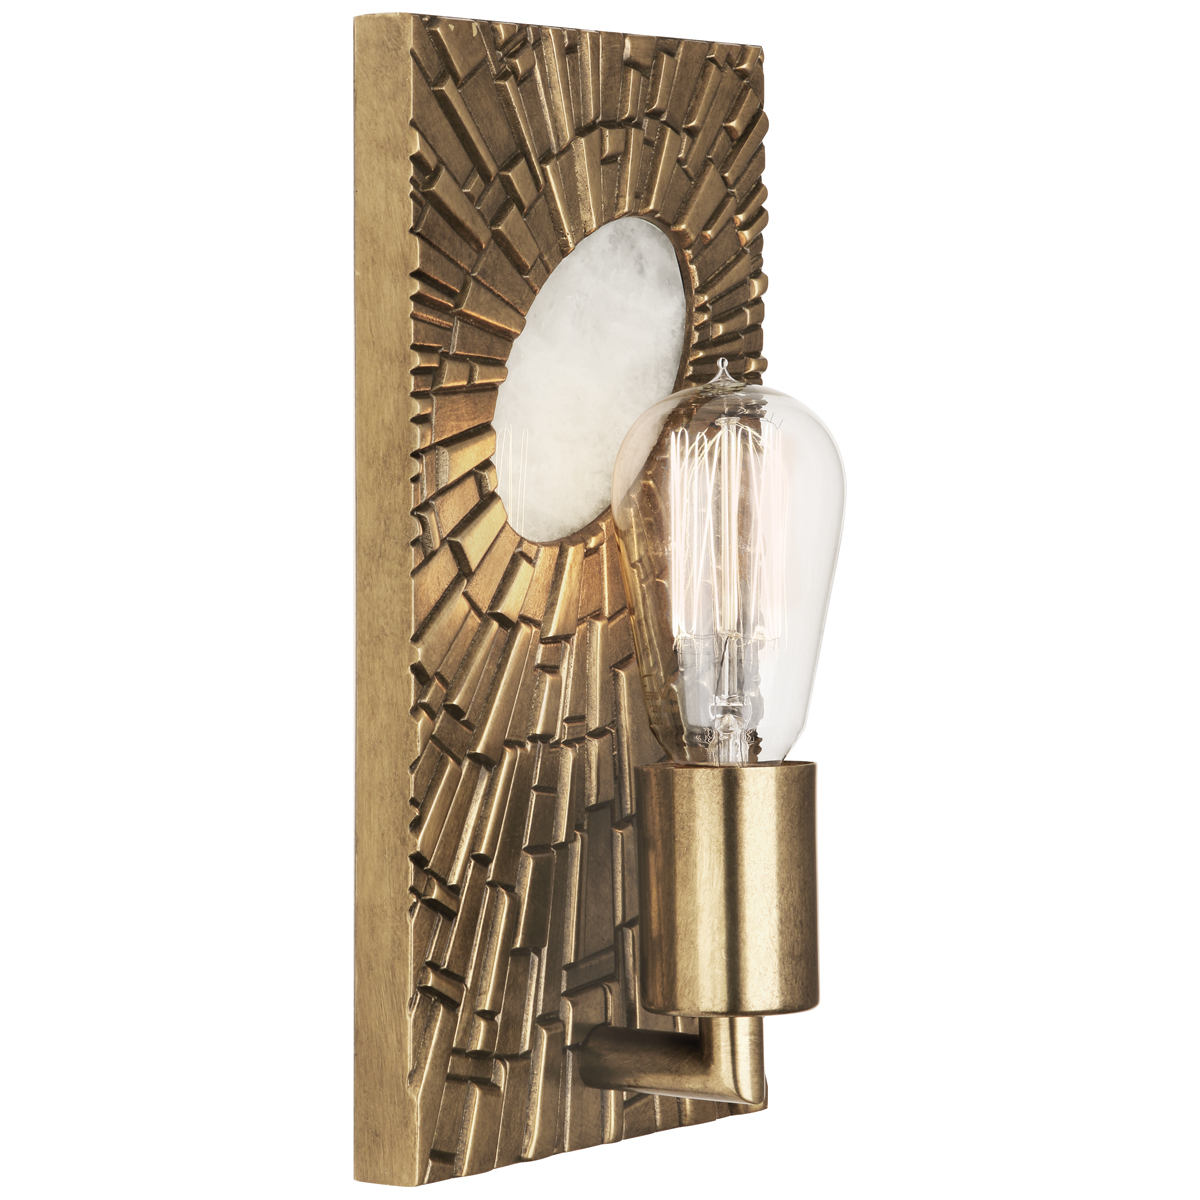 Goliath Wall Sconce Style #418